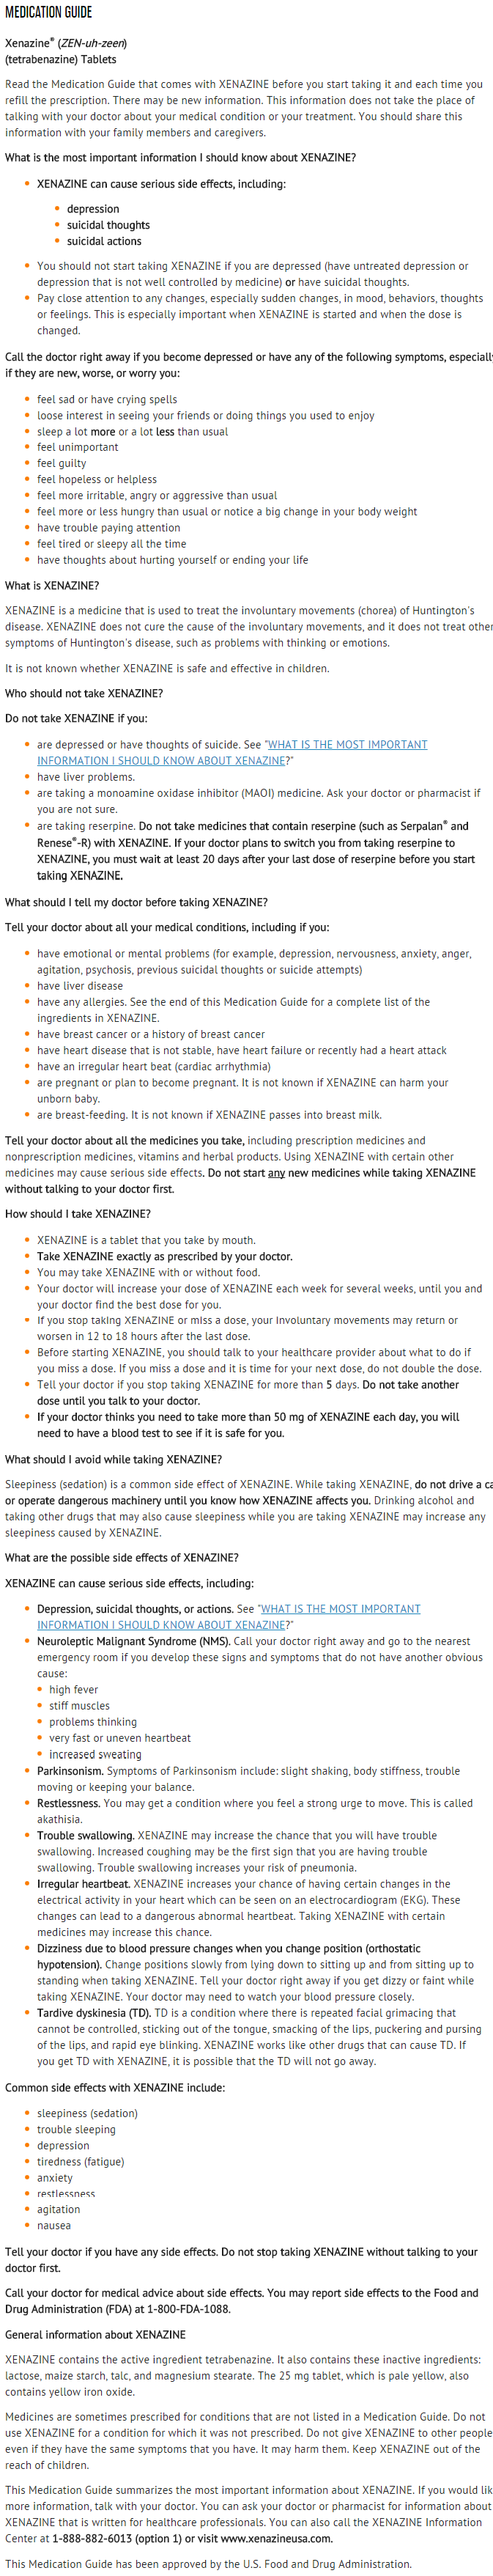 File:Xenazine medication guide.png